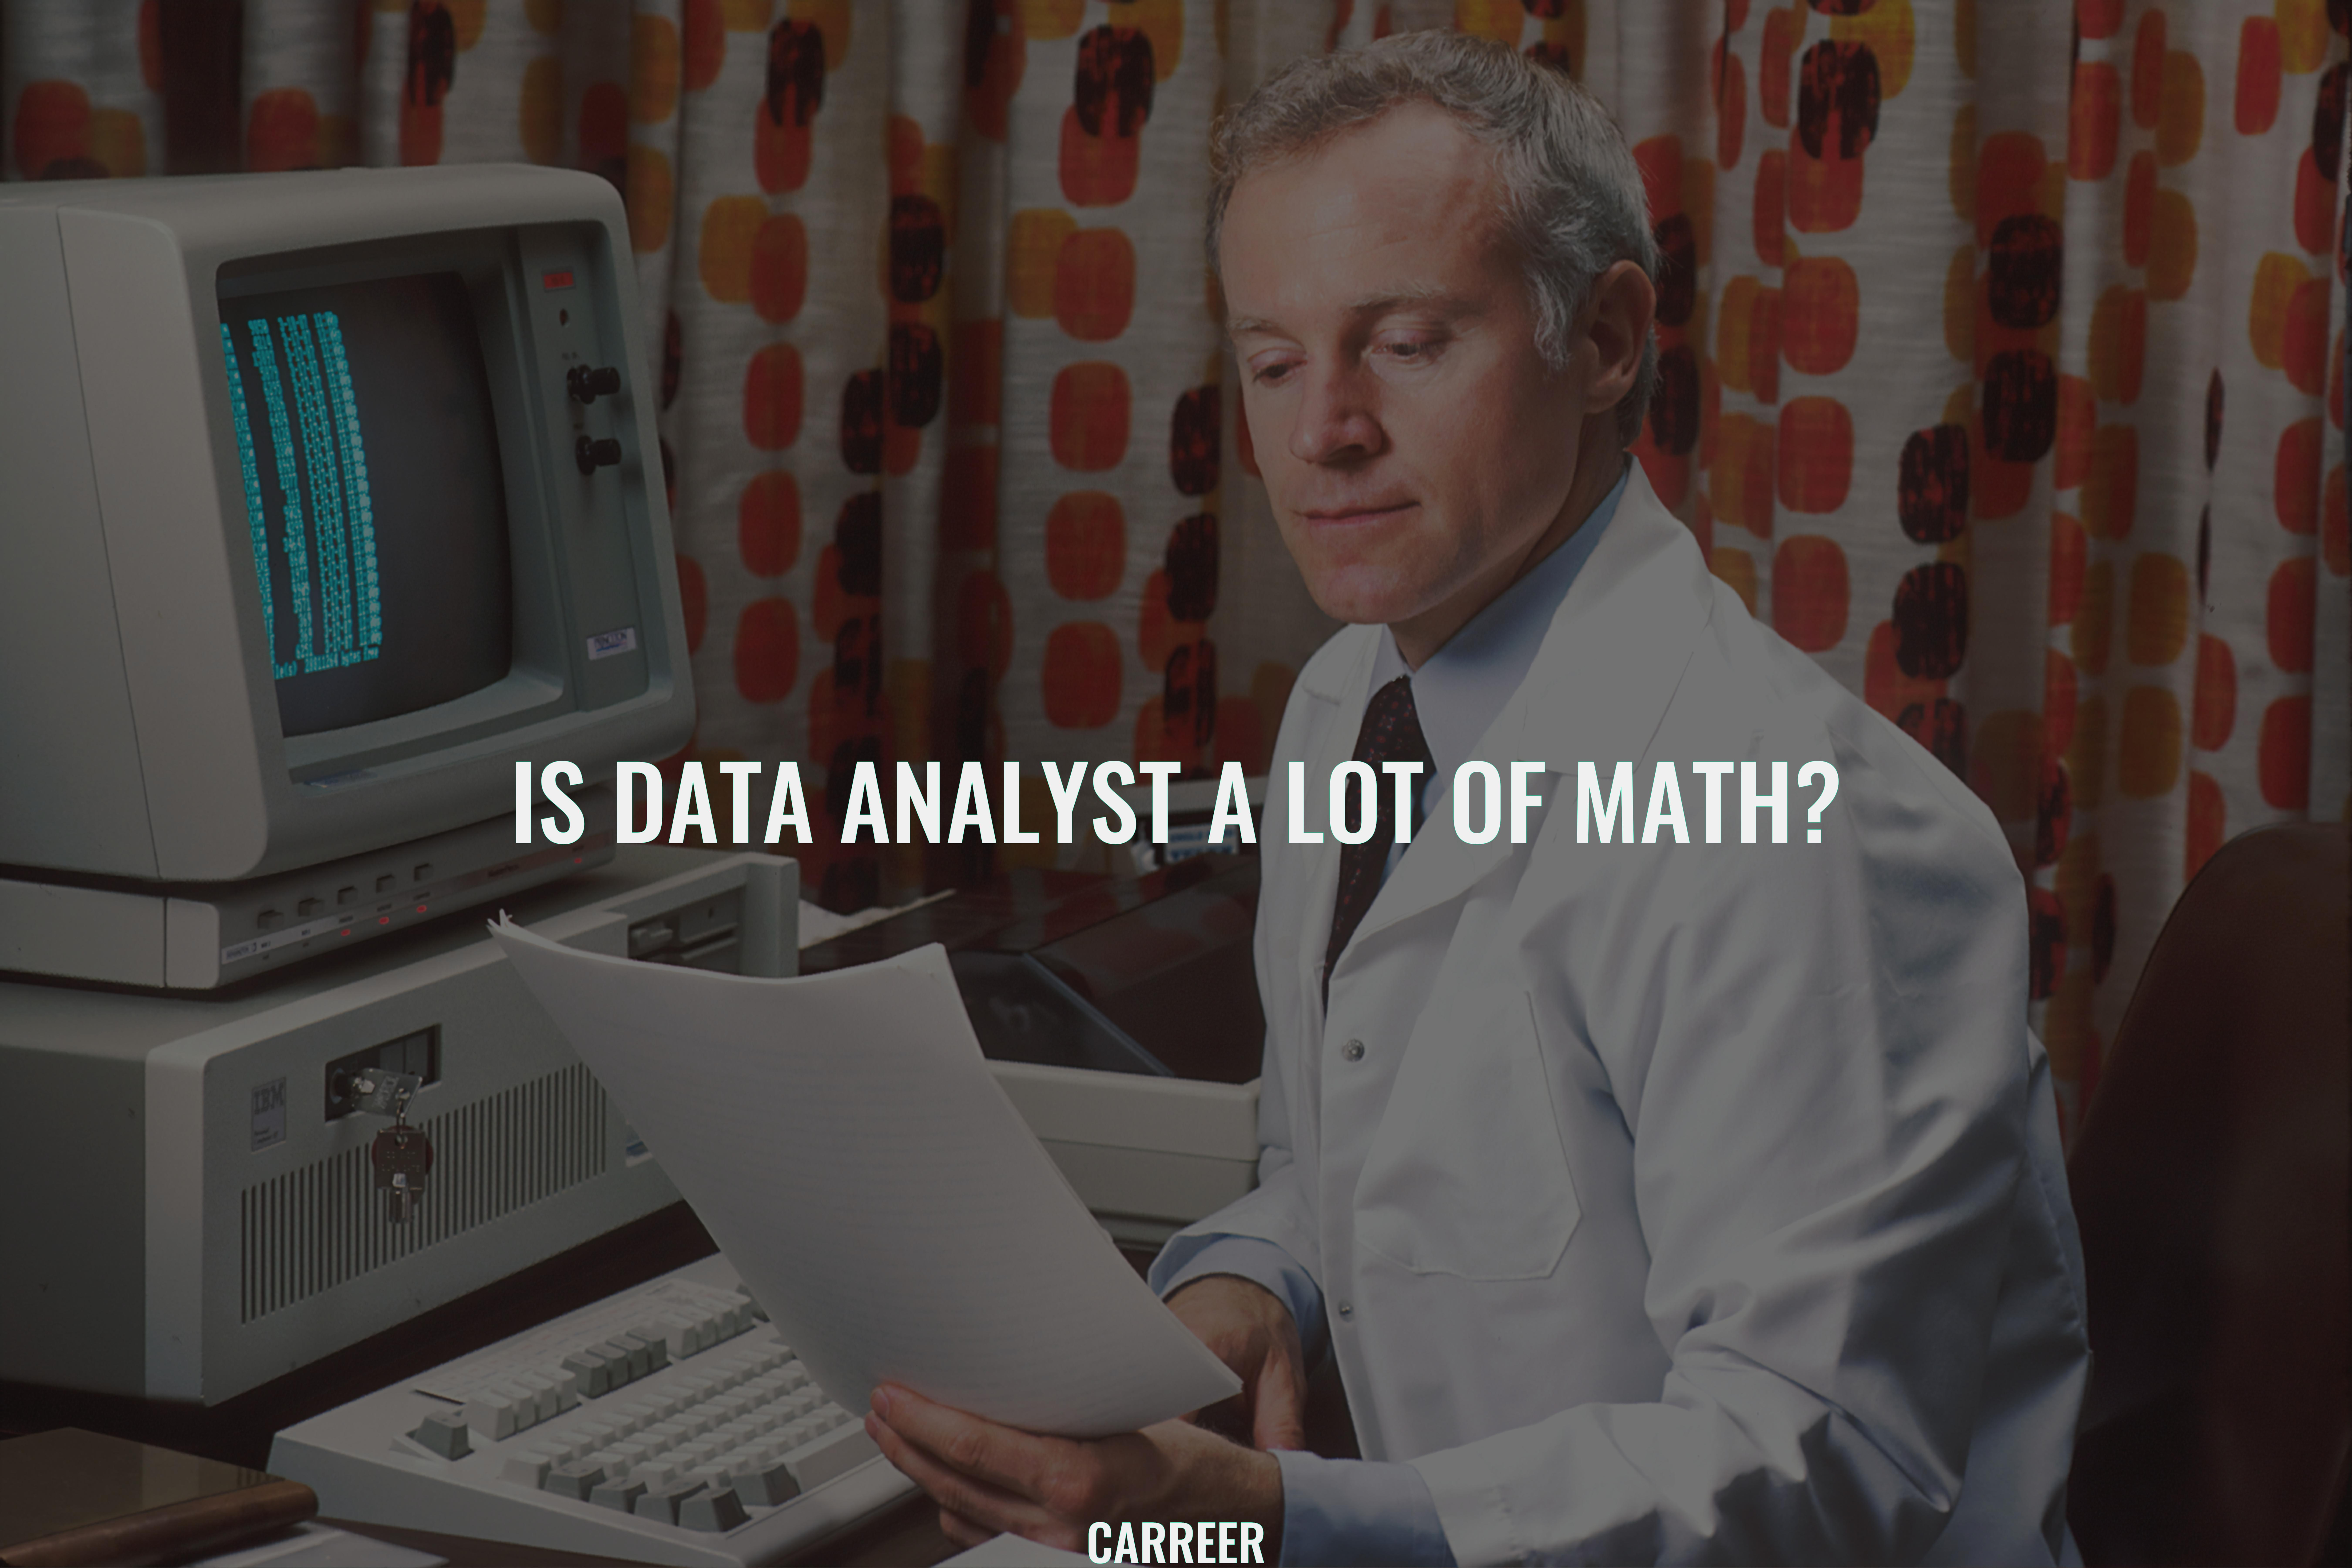 Is data analyst a lot of math?